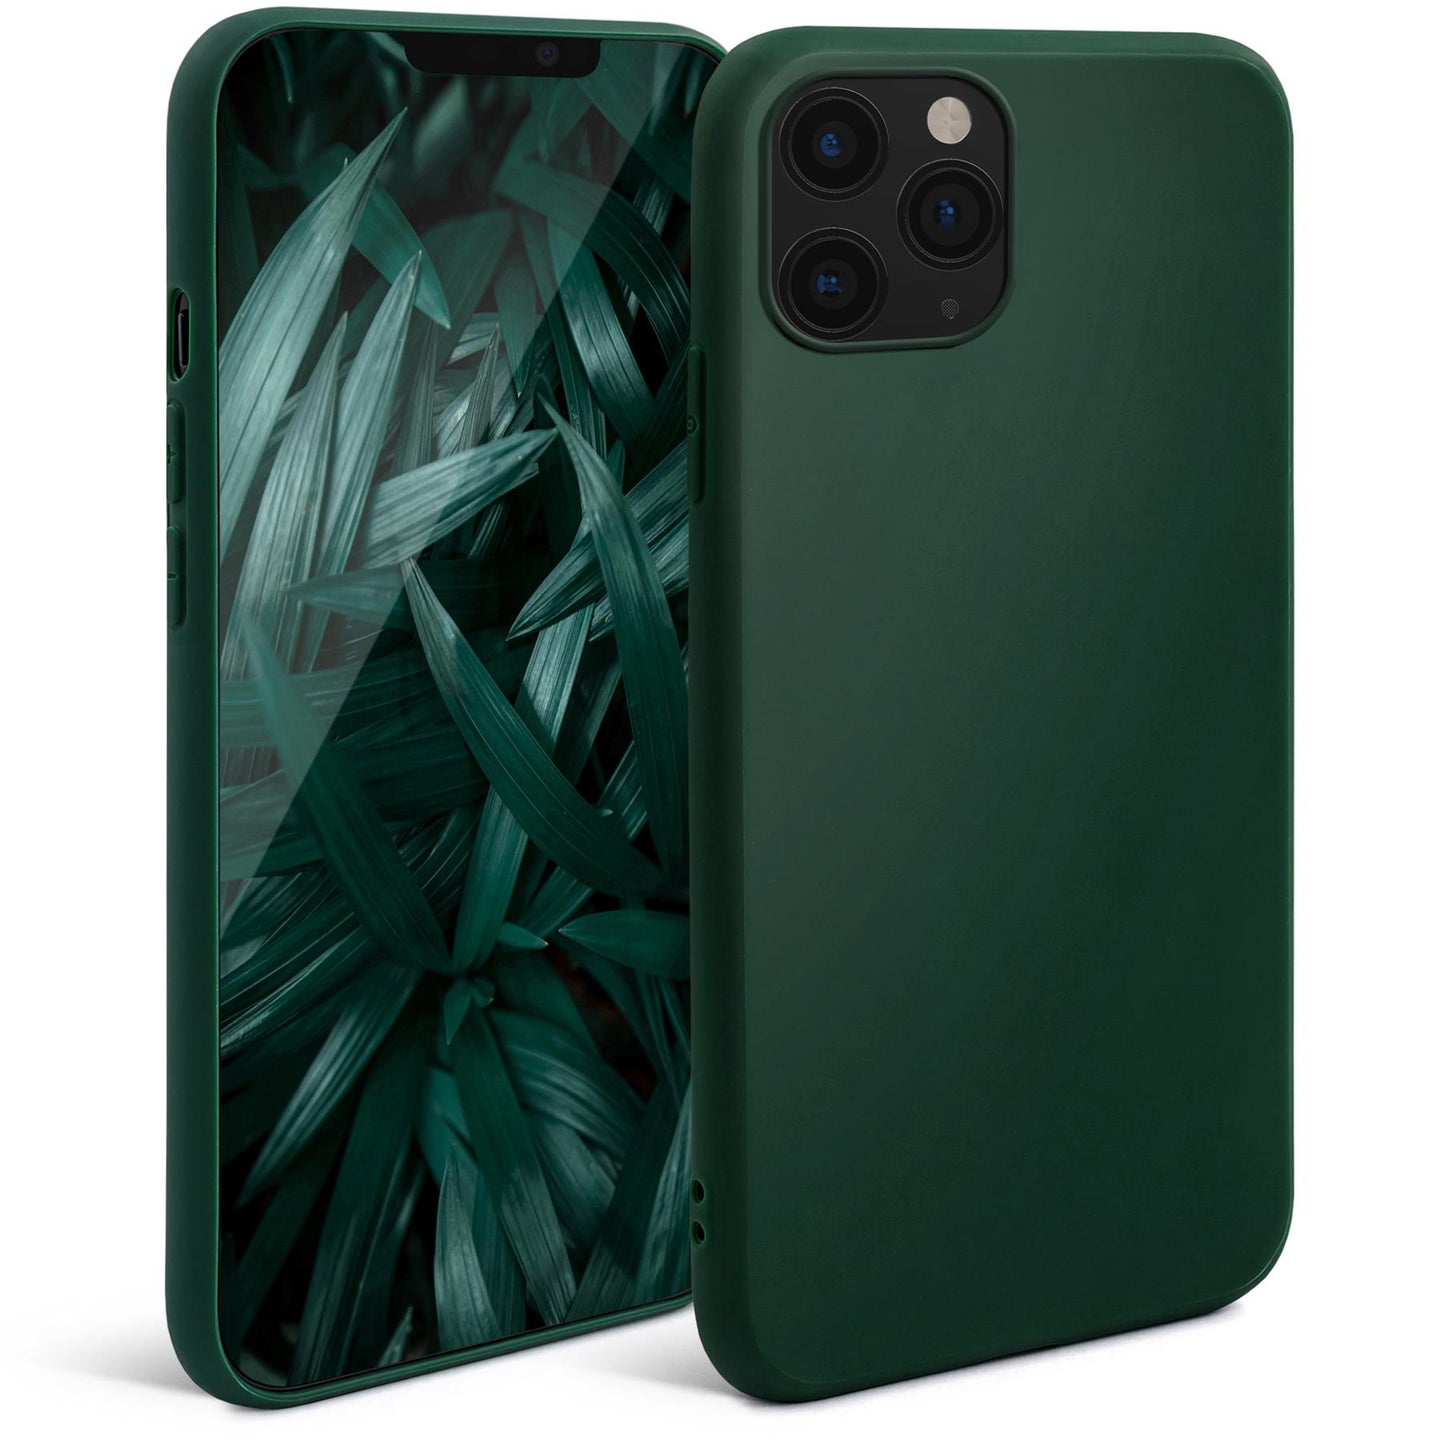 Moozy Minimalist Series Silicone Case for iPhone 11 Pro Max, Midnight Green - Matte Finish Slim Soft TPU Cover